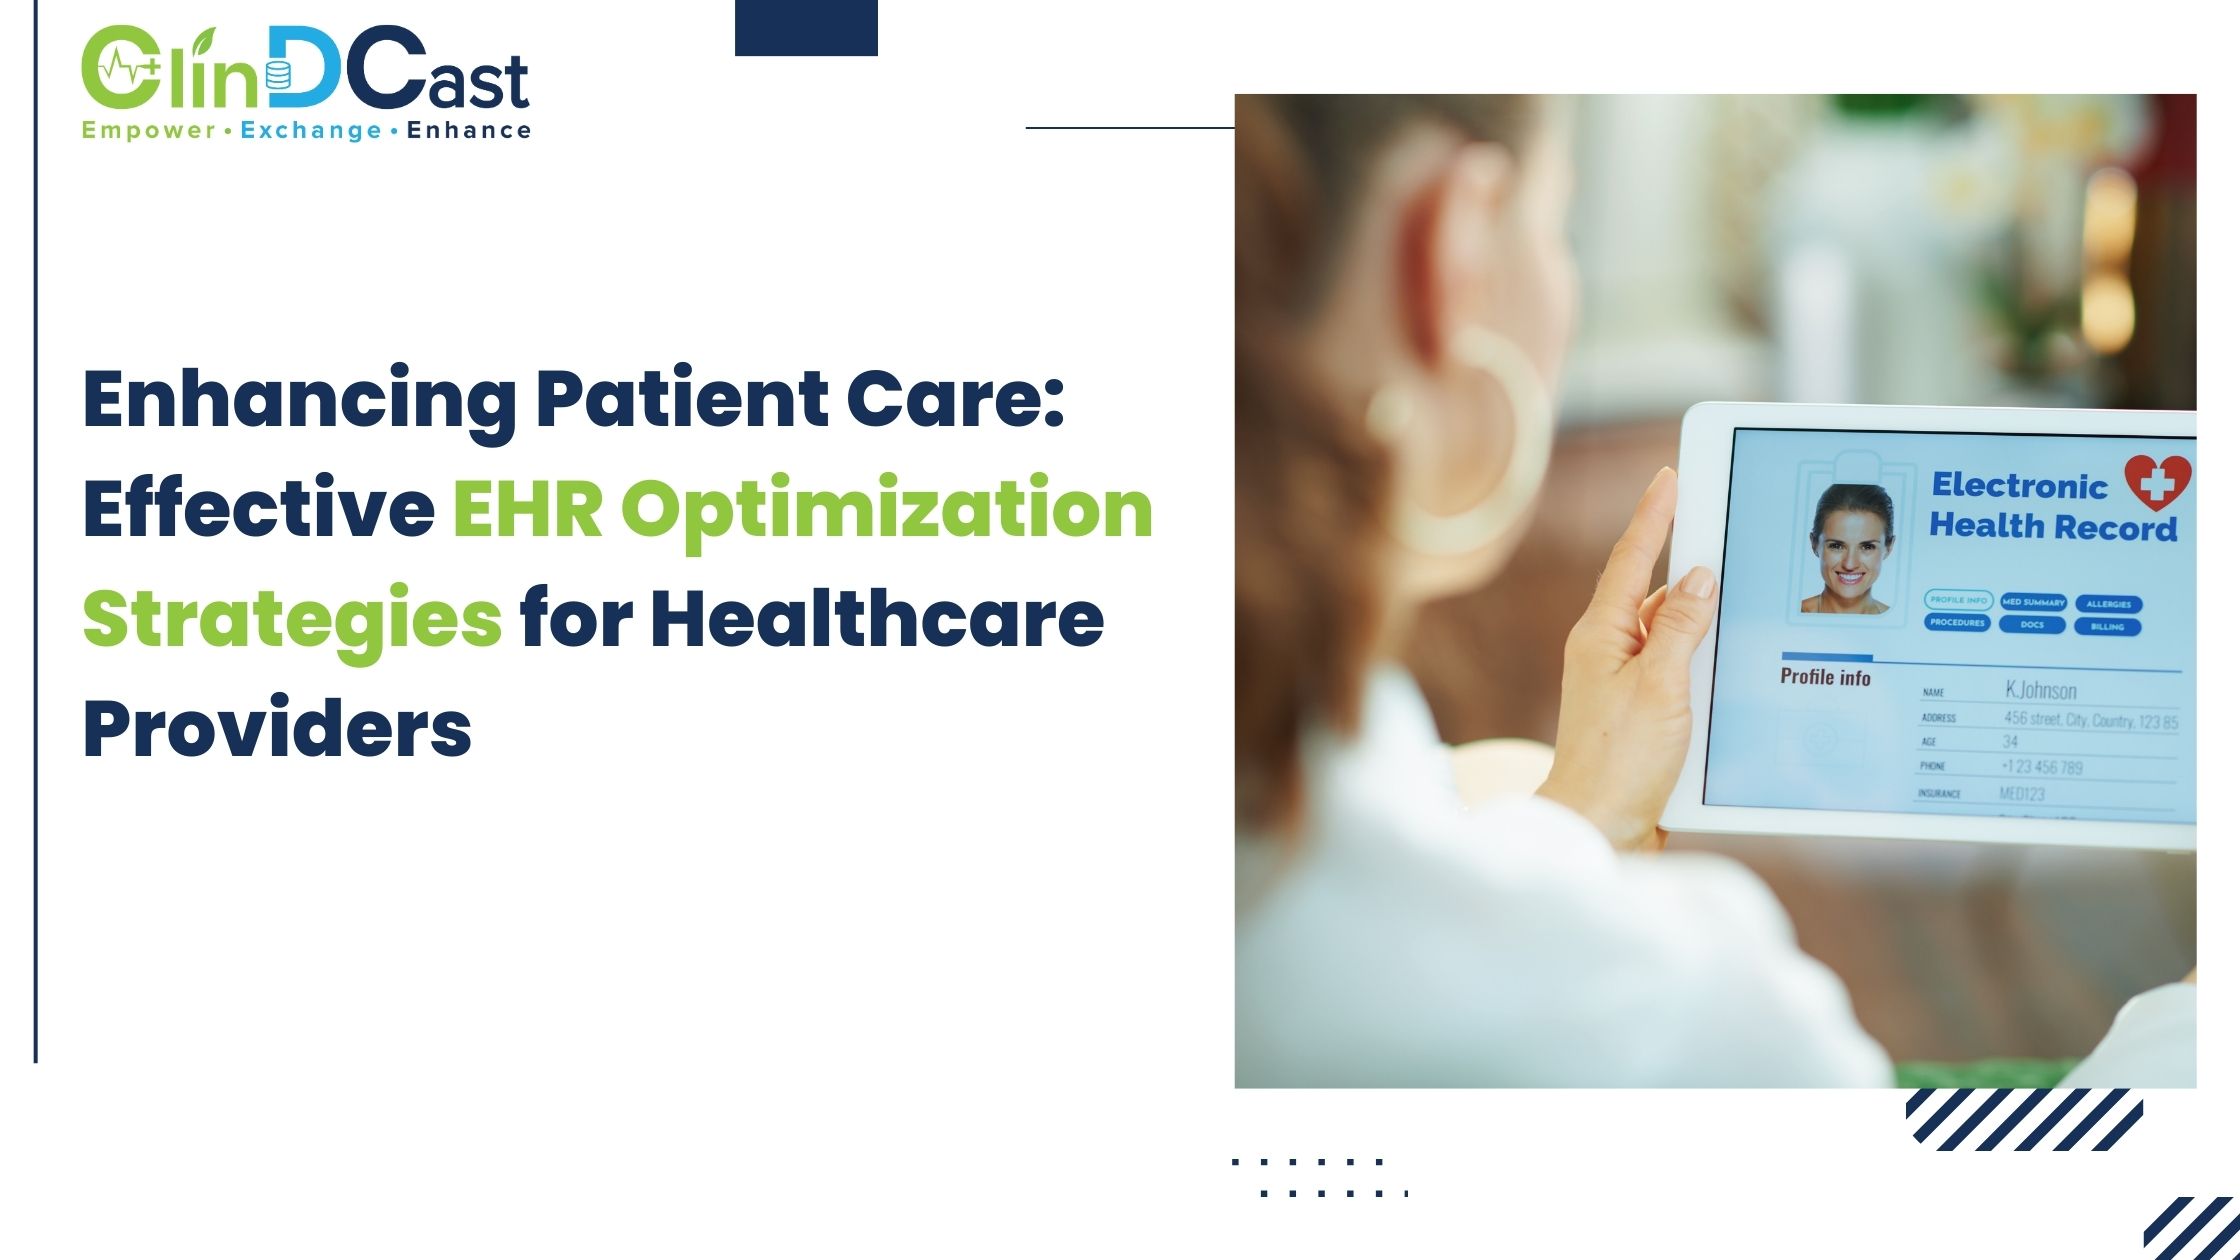 Enhancing Patient Care: Effective EHR Optimization Strategies for Healthcare Providers